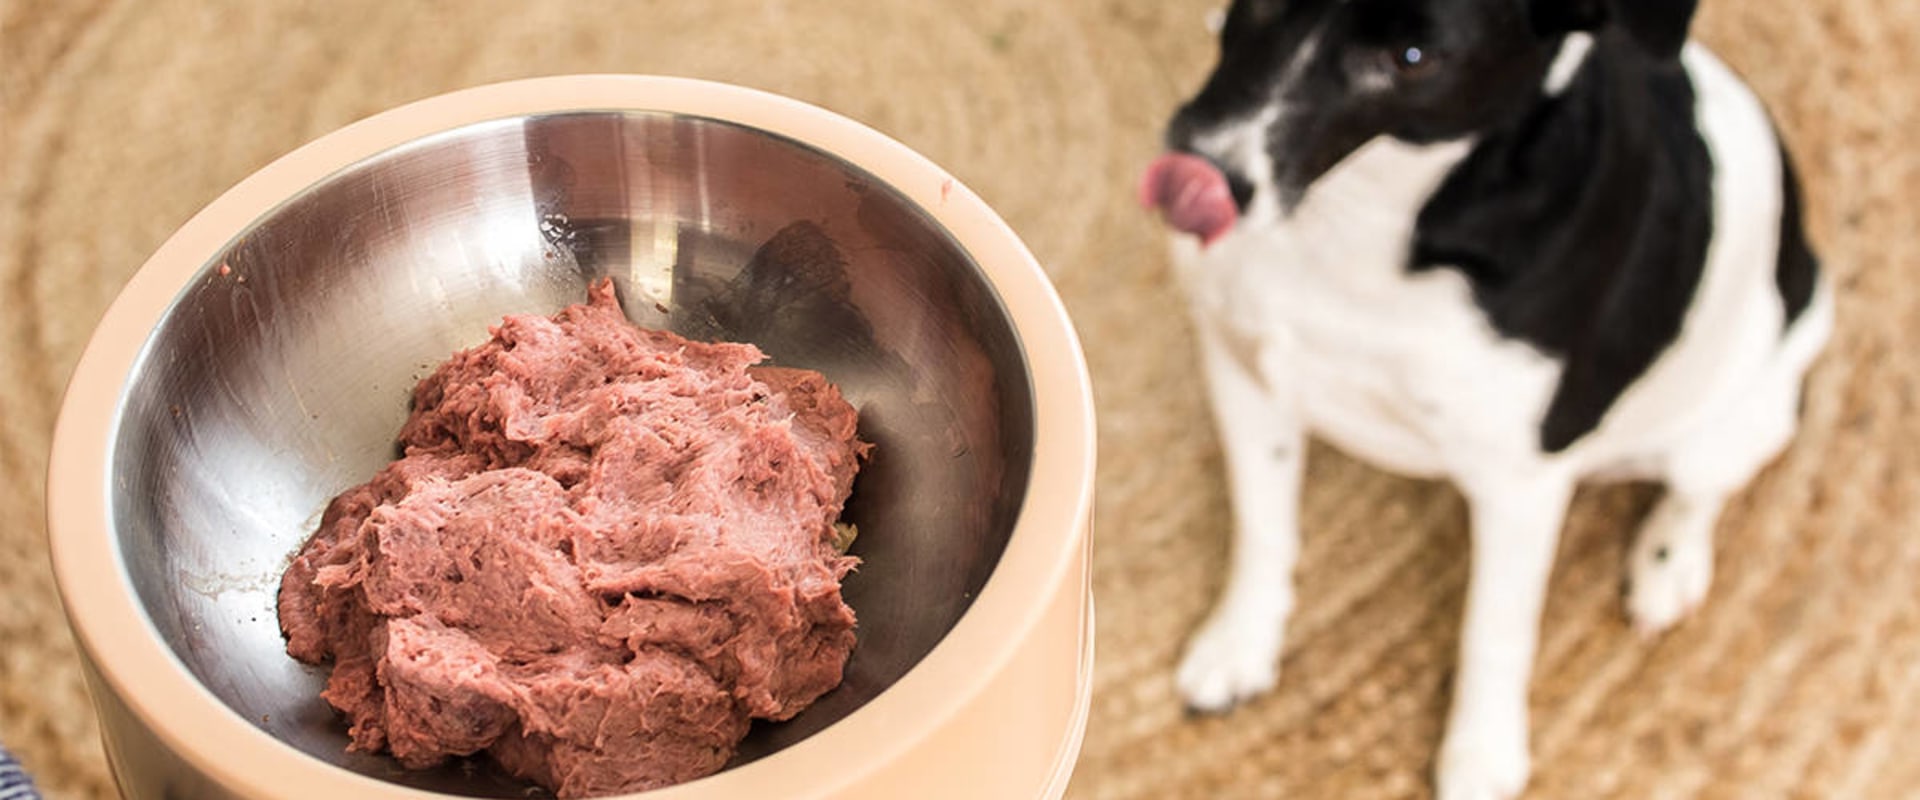 Where to store raw dog food?